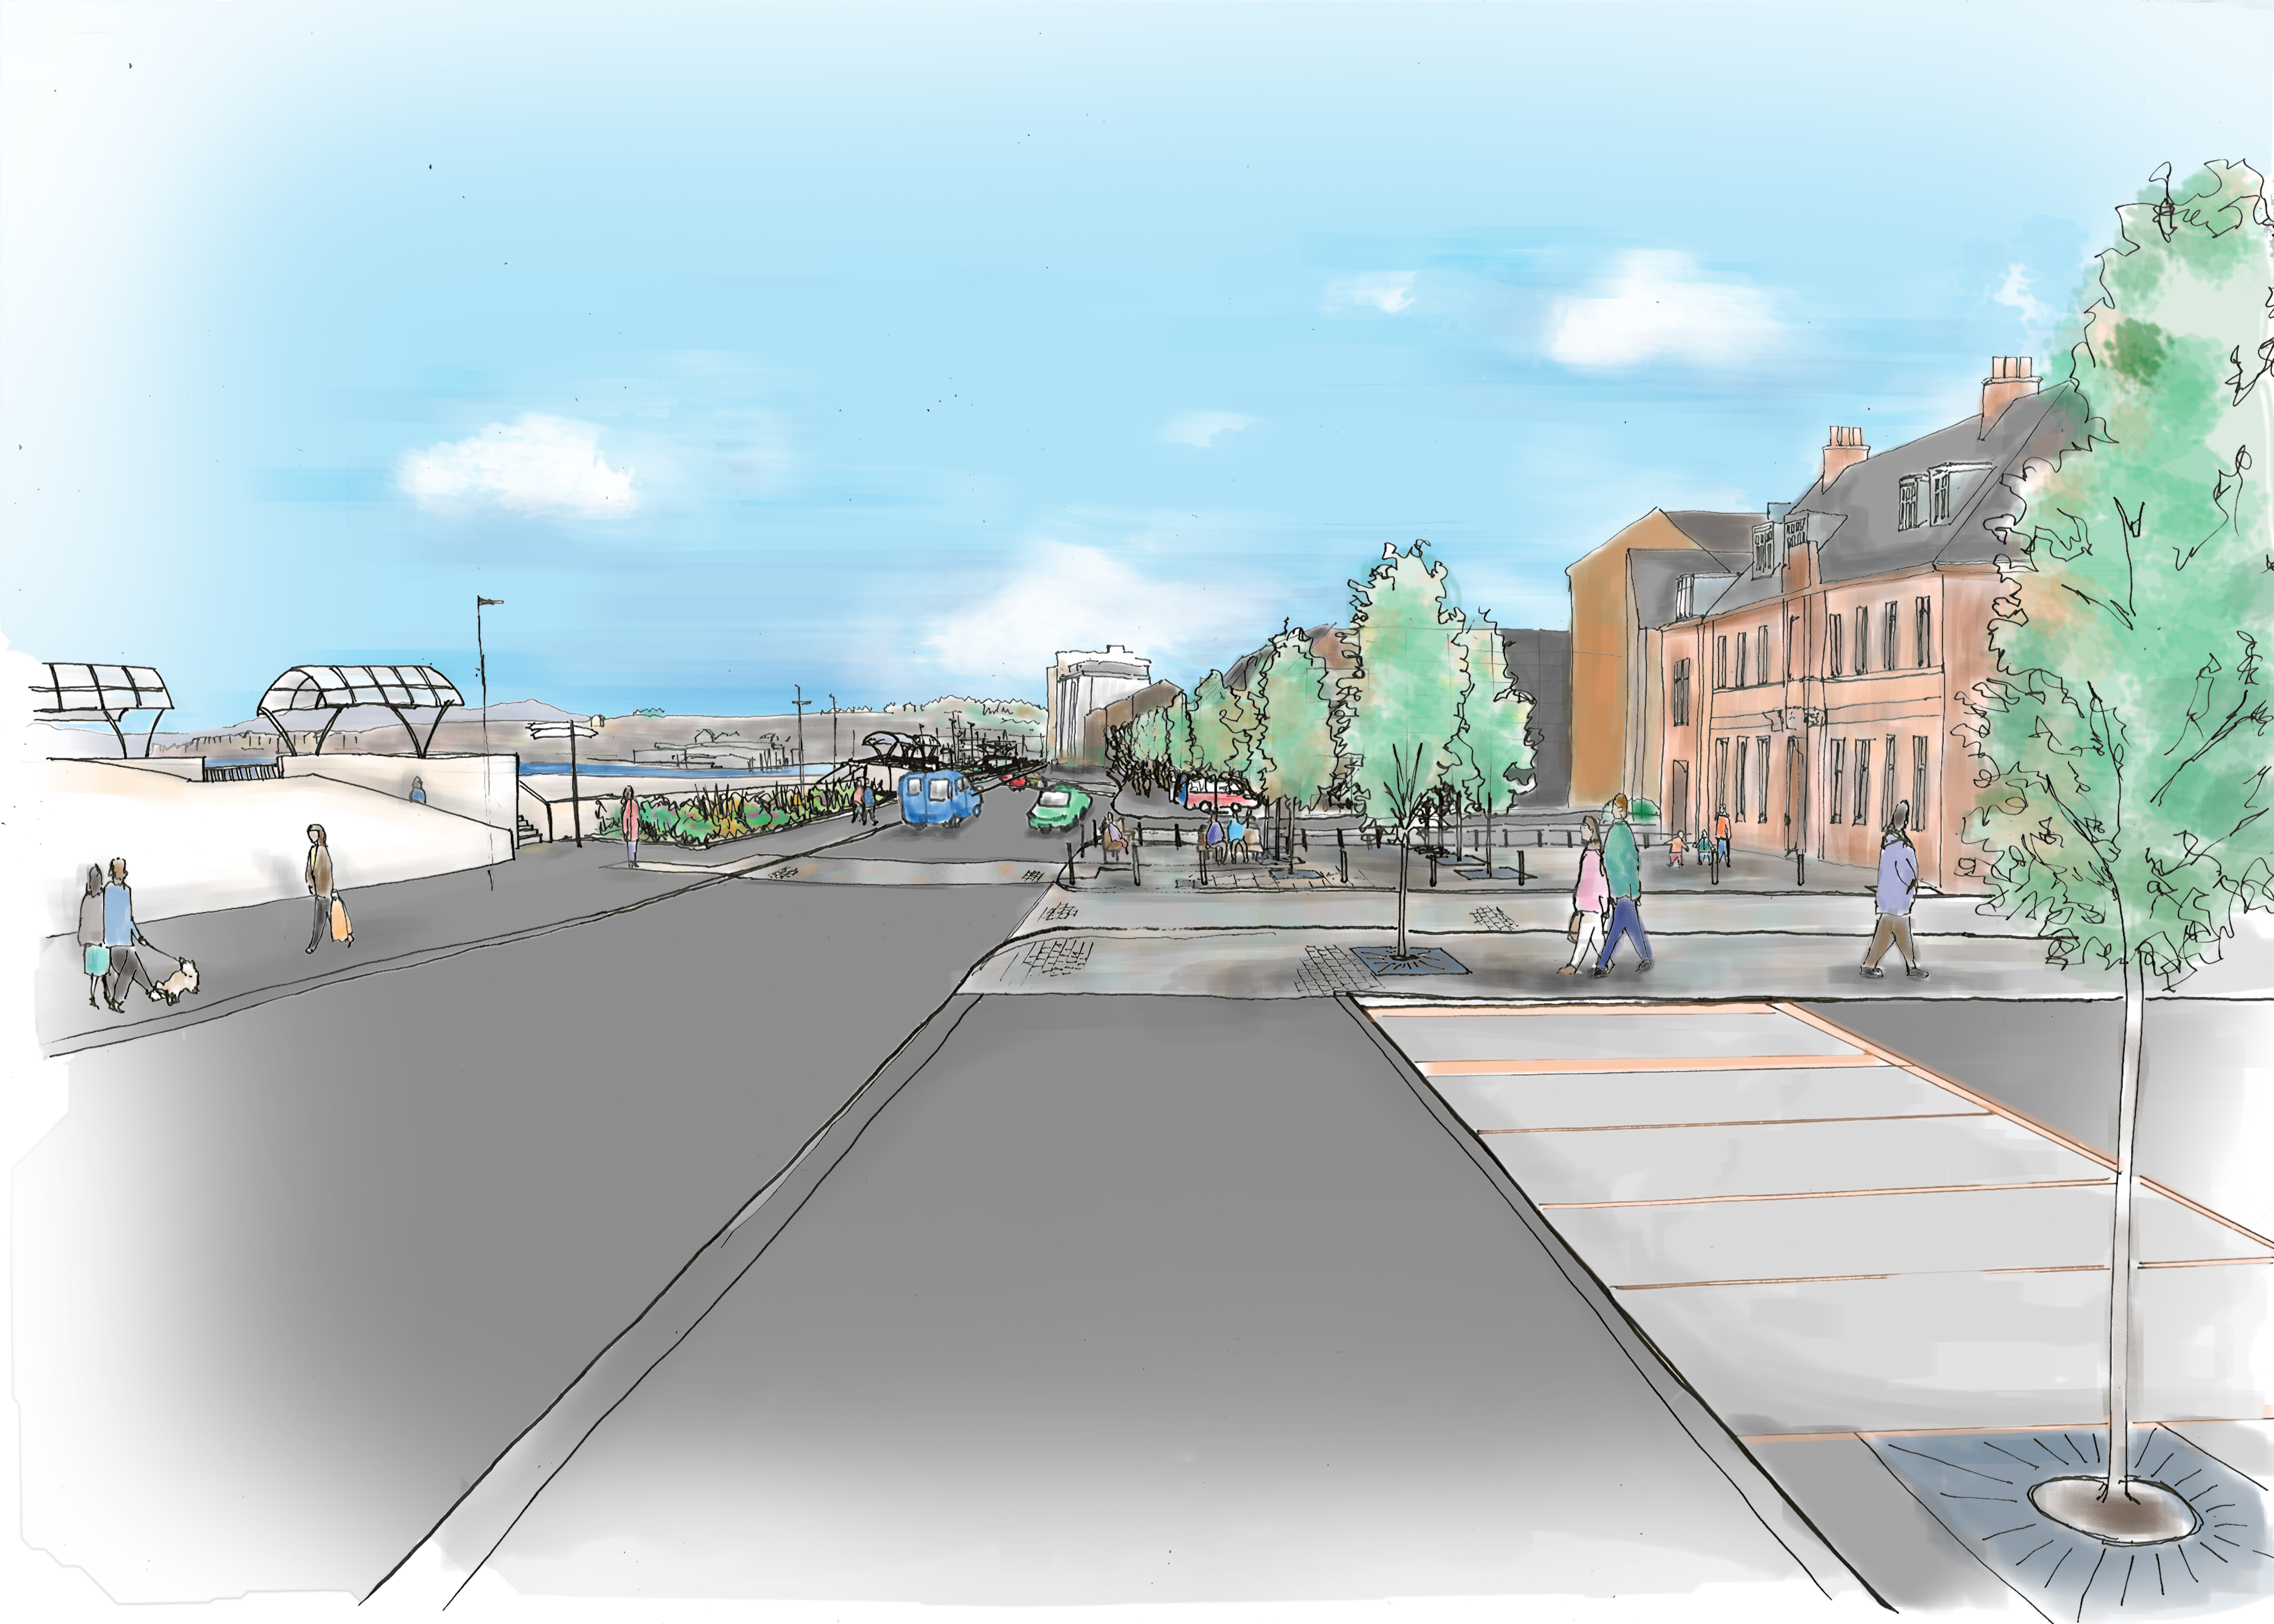 An artist's impression of the finished works on Kirkcaldy Esplanade.